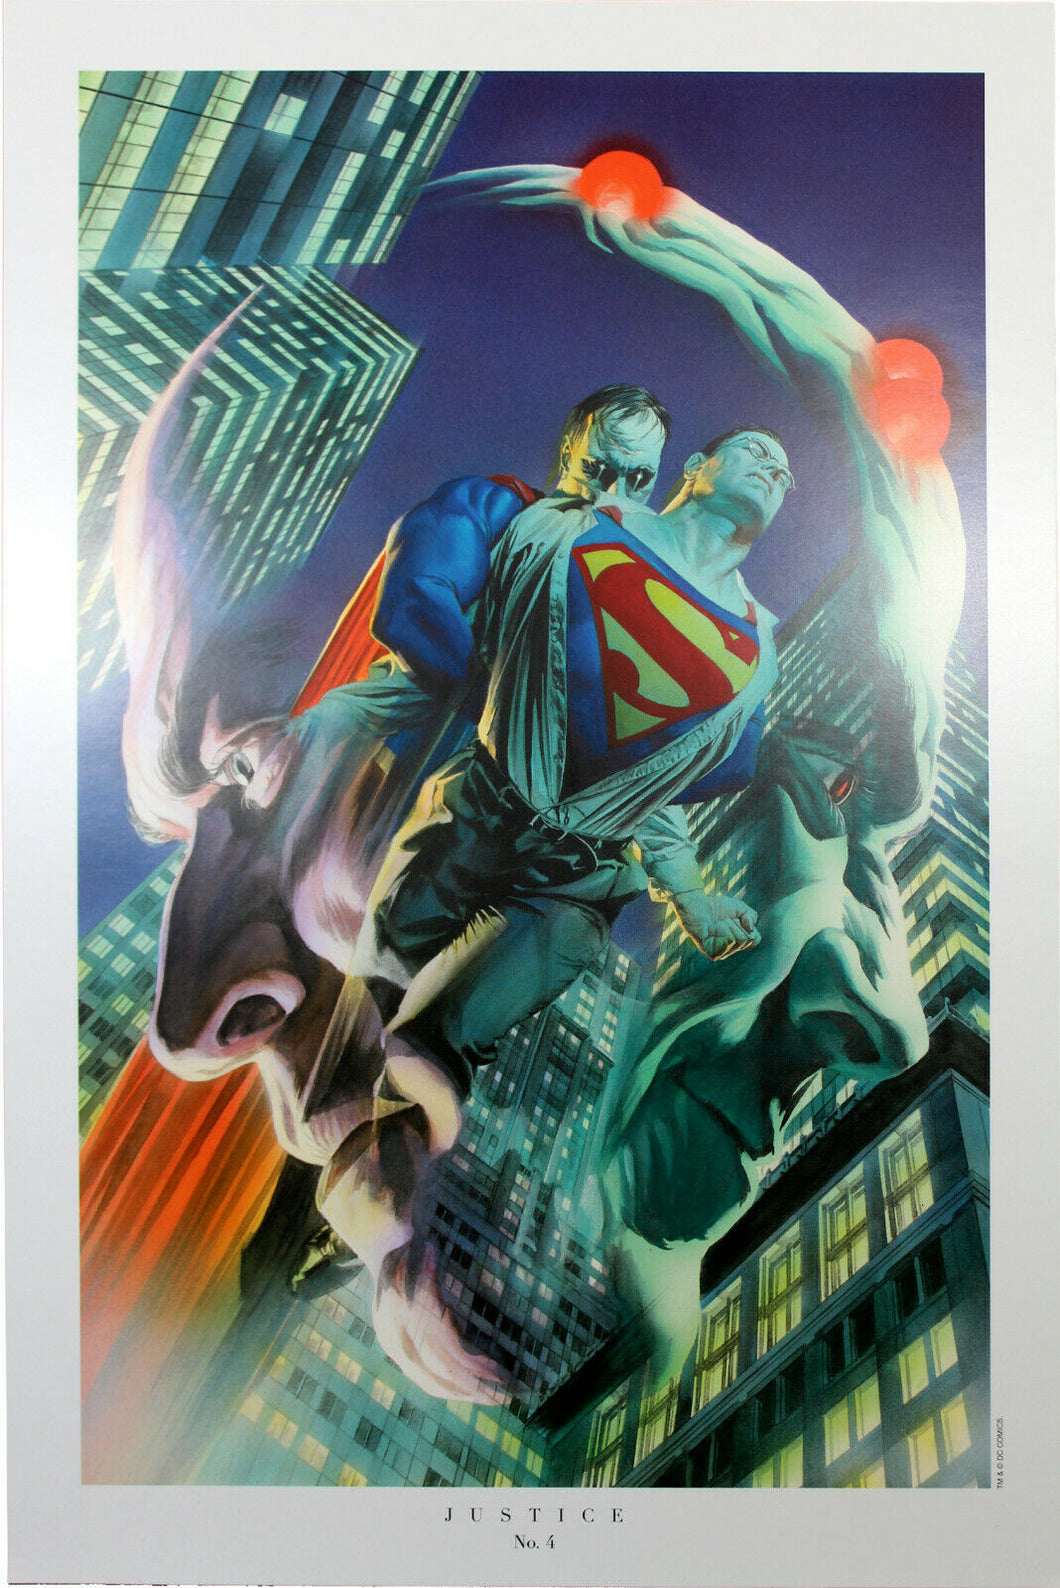 JUSTICE #4 ART PRINT by Alex Ross ~ 9